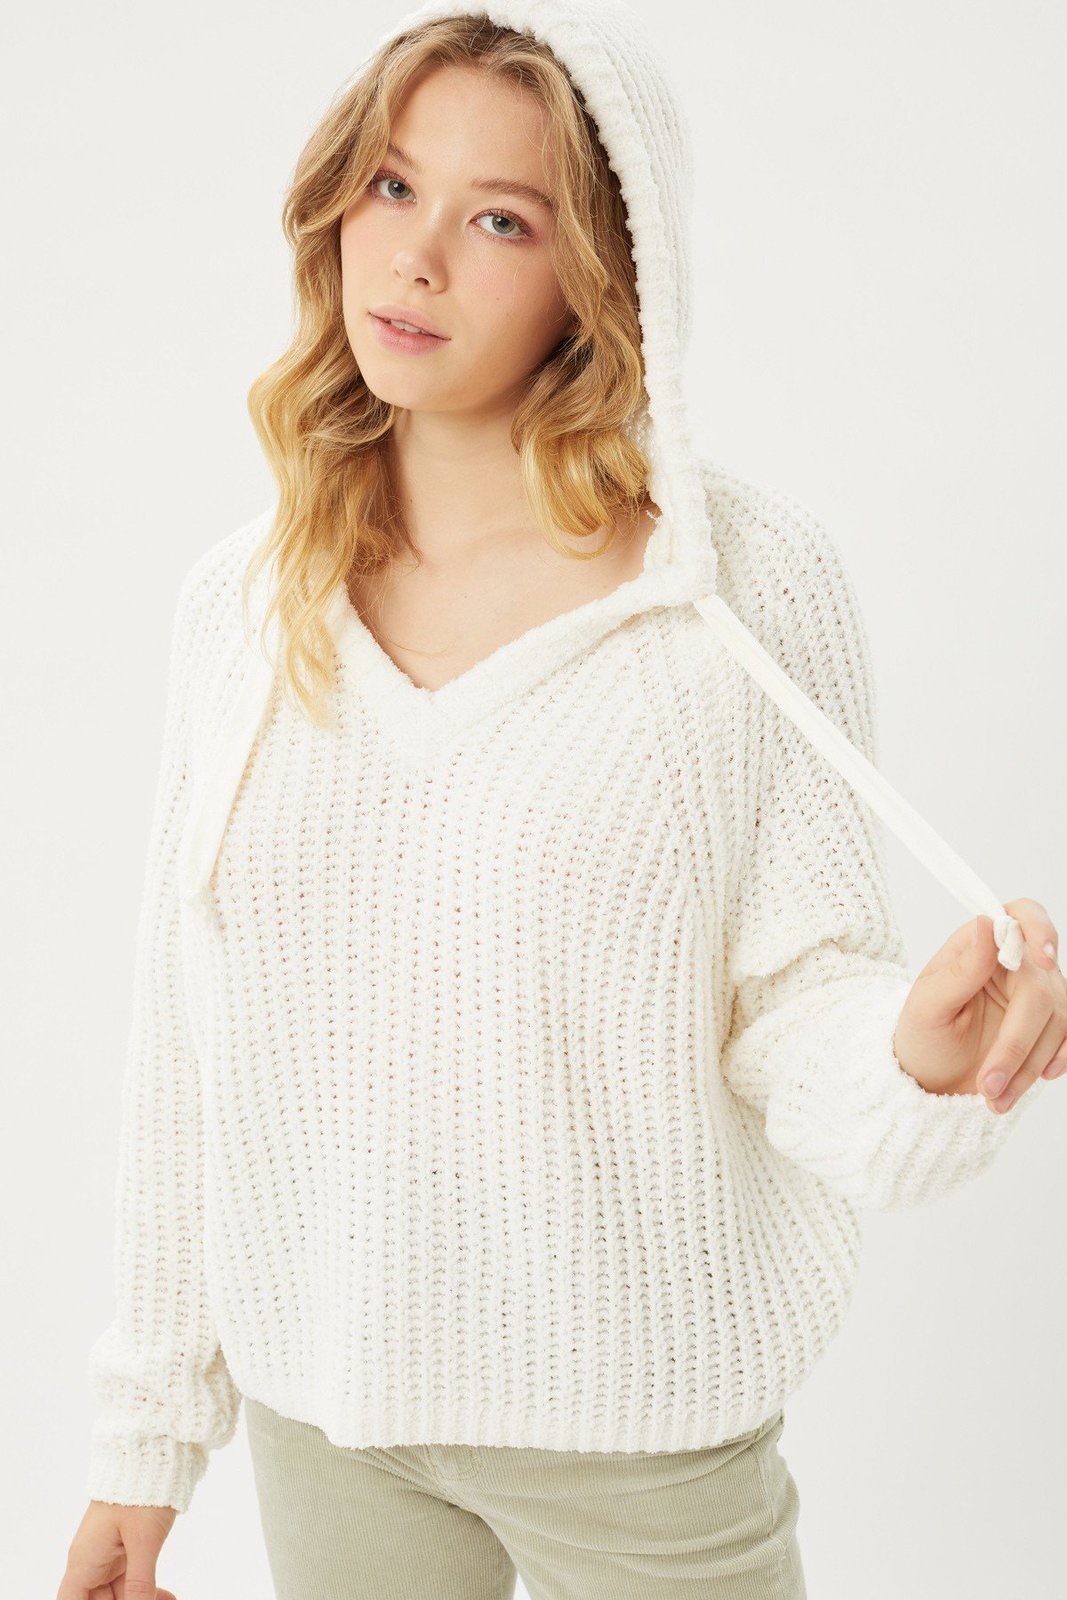 Pullover Hoodie Sweater Top Women Ivory